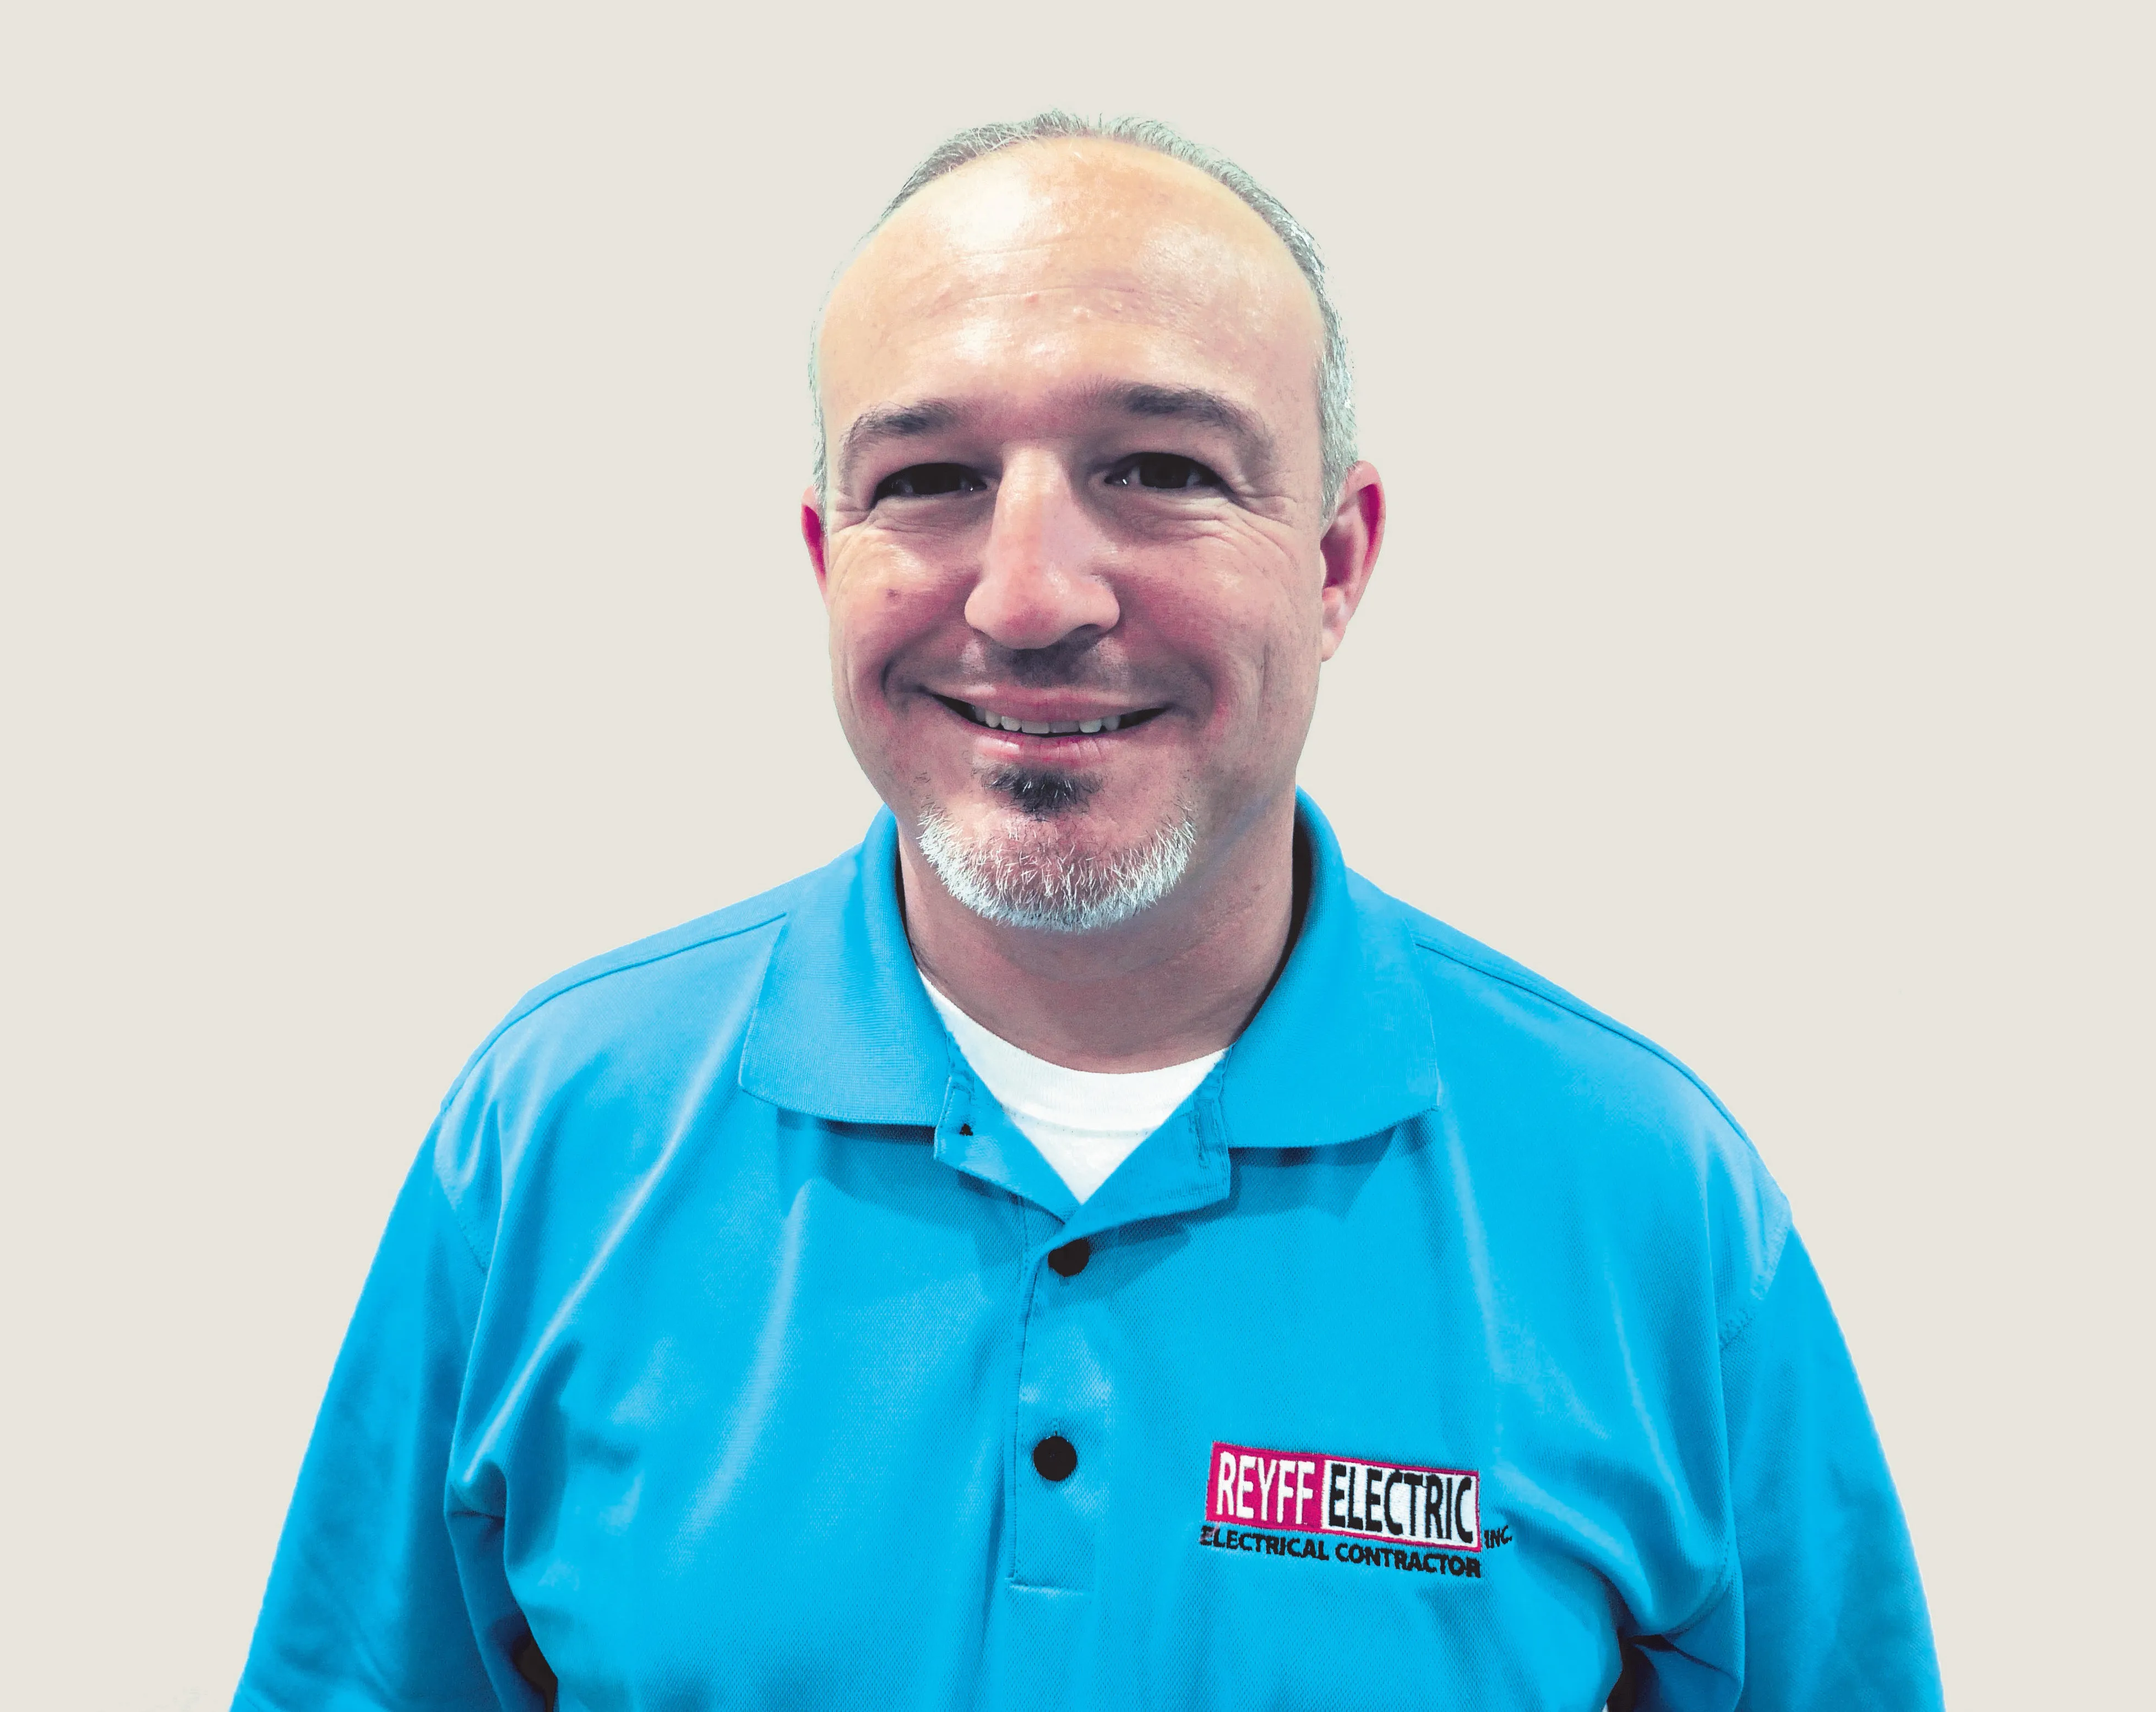 Will Phinney is operations manager of Reyff Electric, Inc., a Diamond Certified company since 2011. He can be reached at (415) 508-5638 or by email.